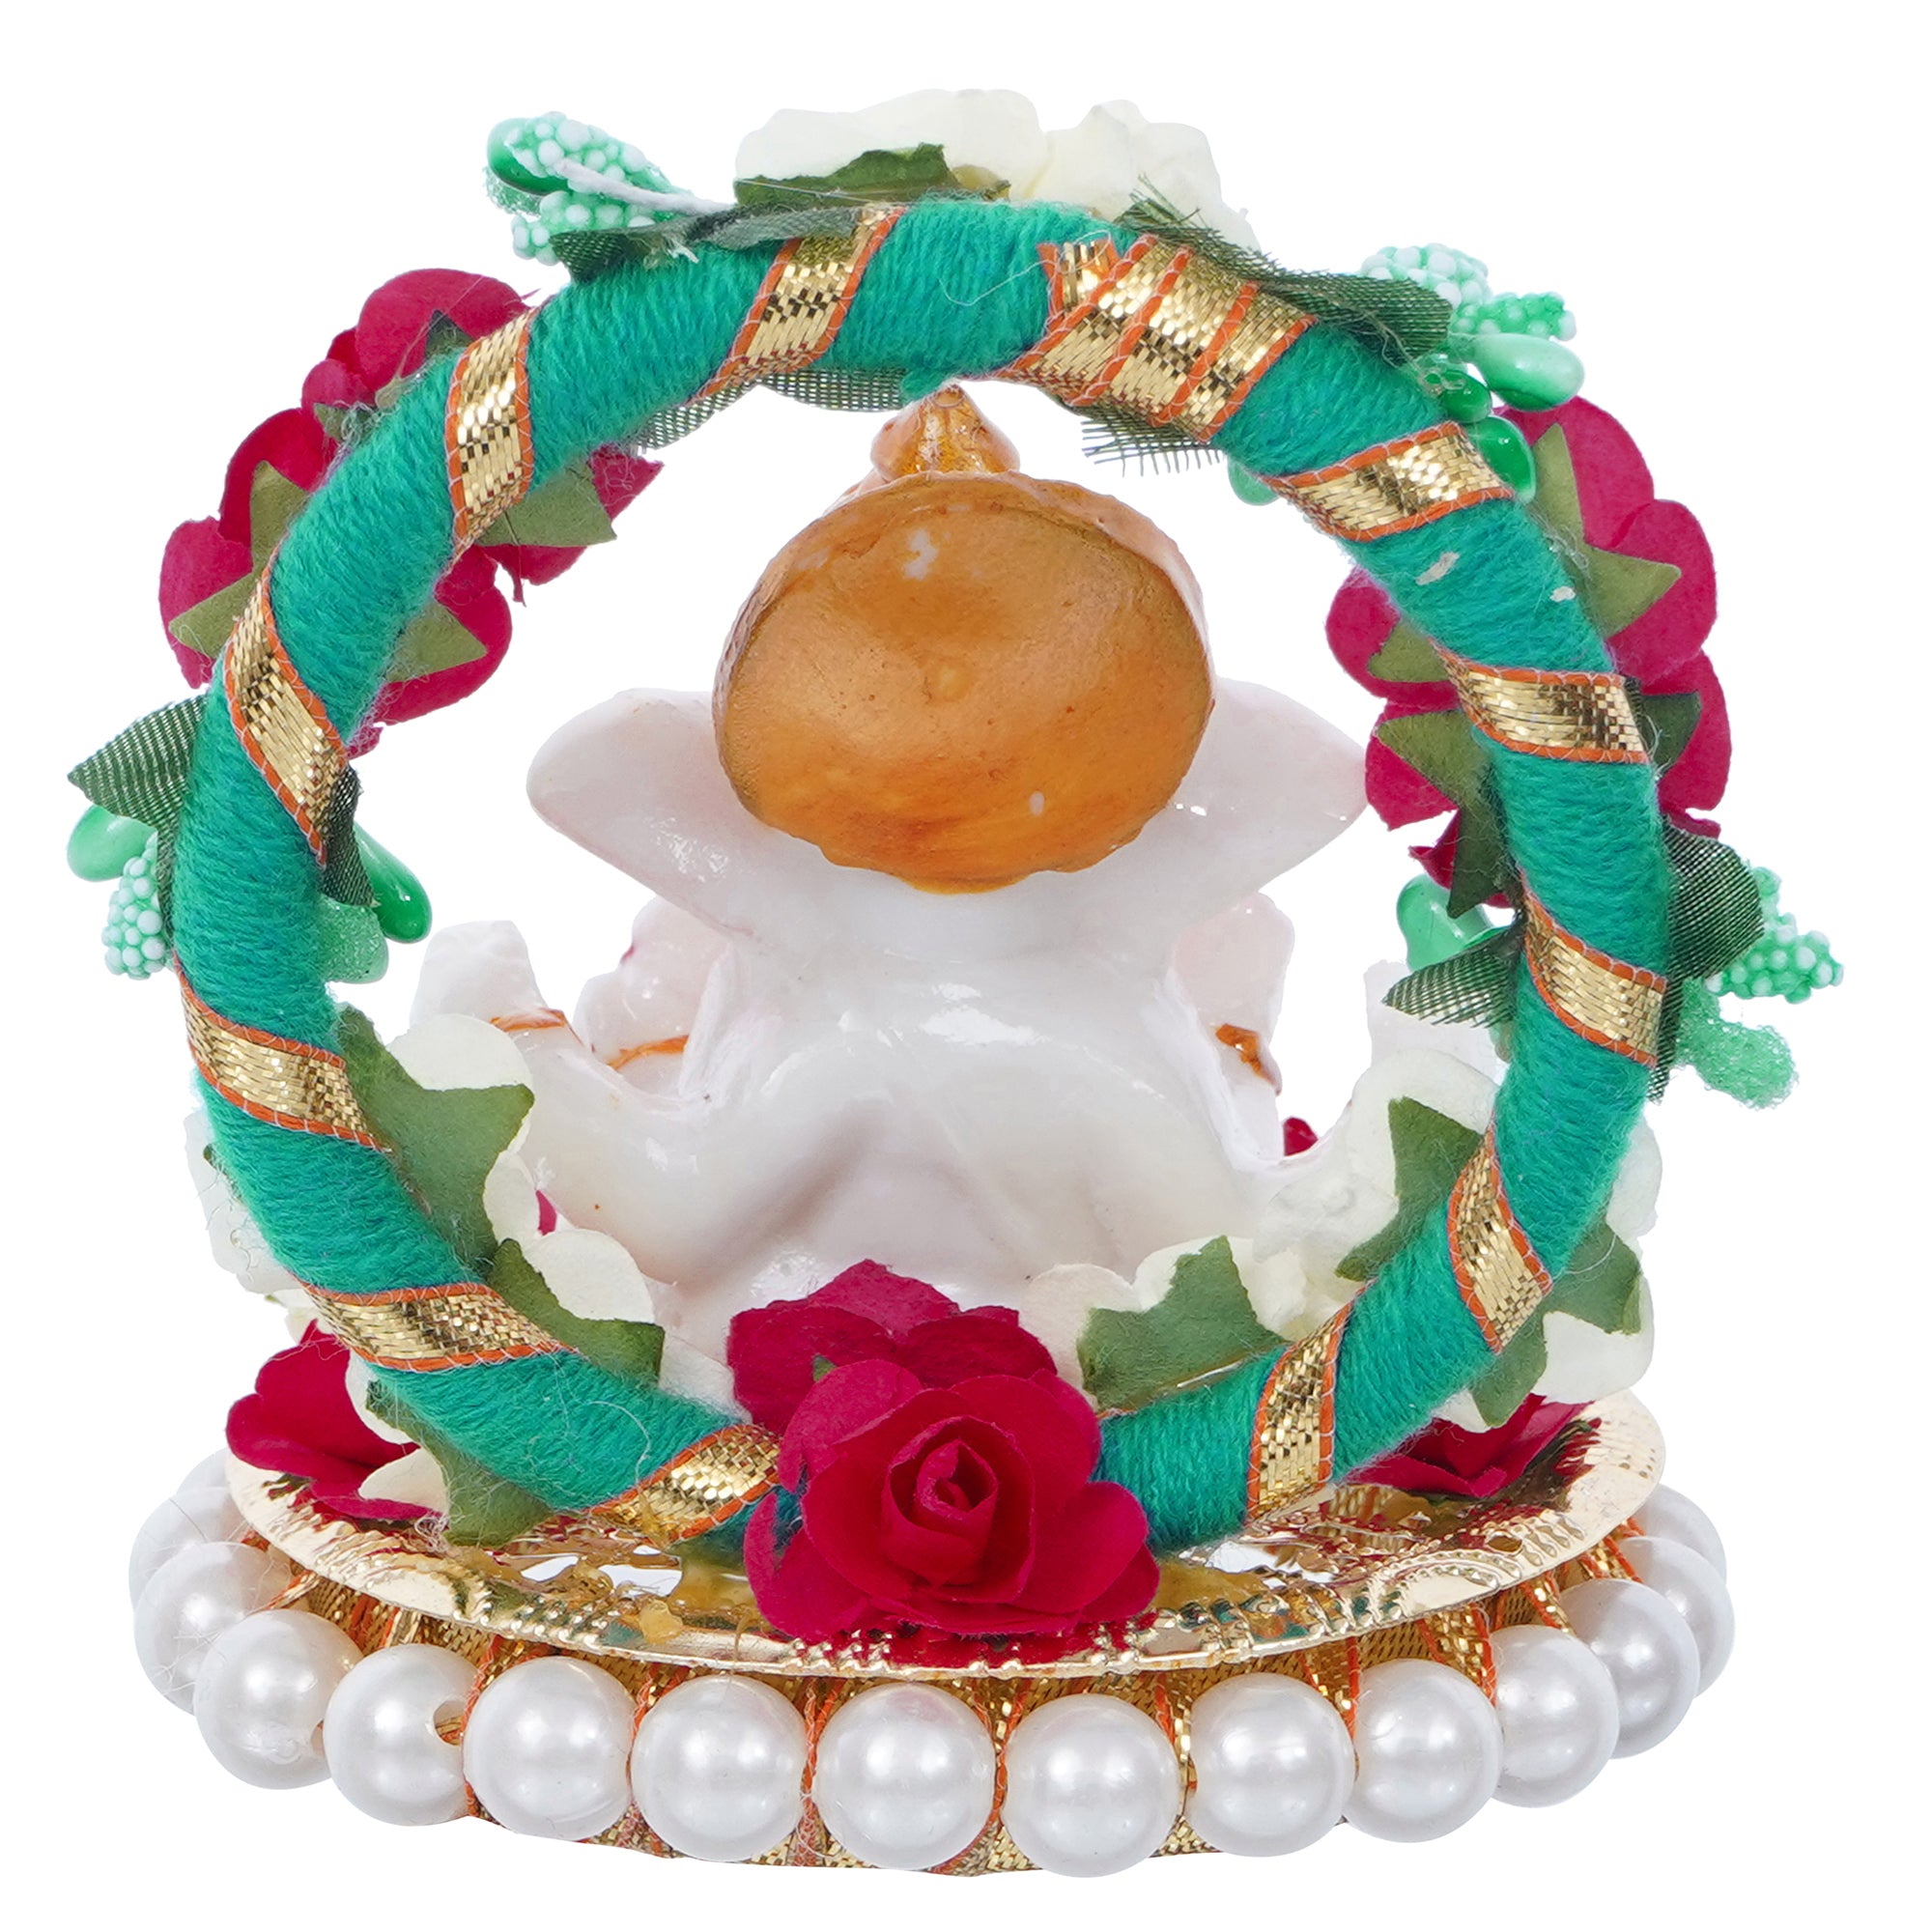 Polyresin Lord Ganesha Idol on Decorative Handcrafted Plate with Throne of Colorful Flowers 6